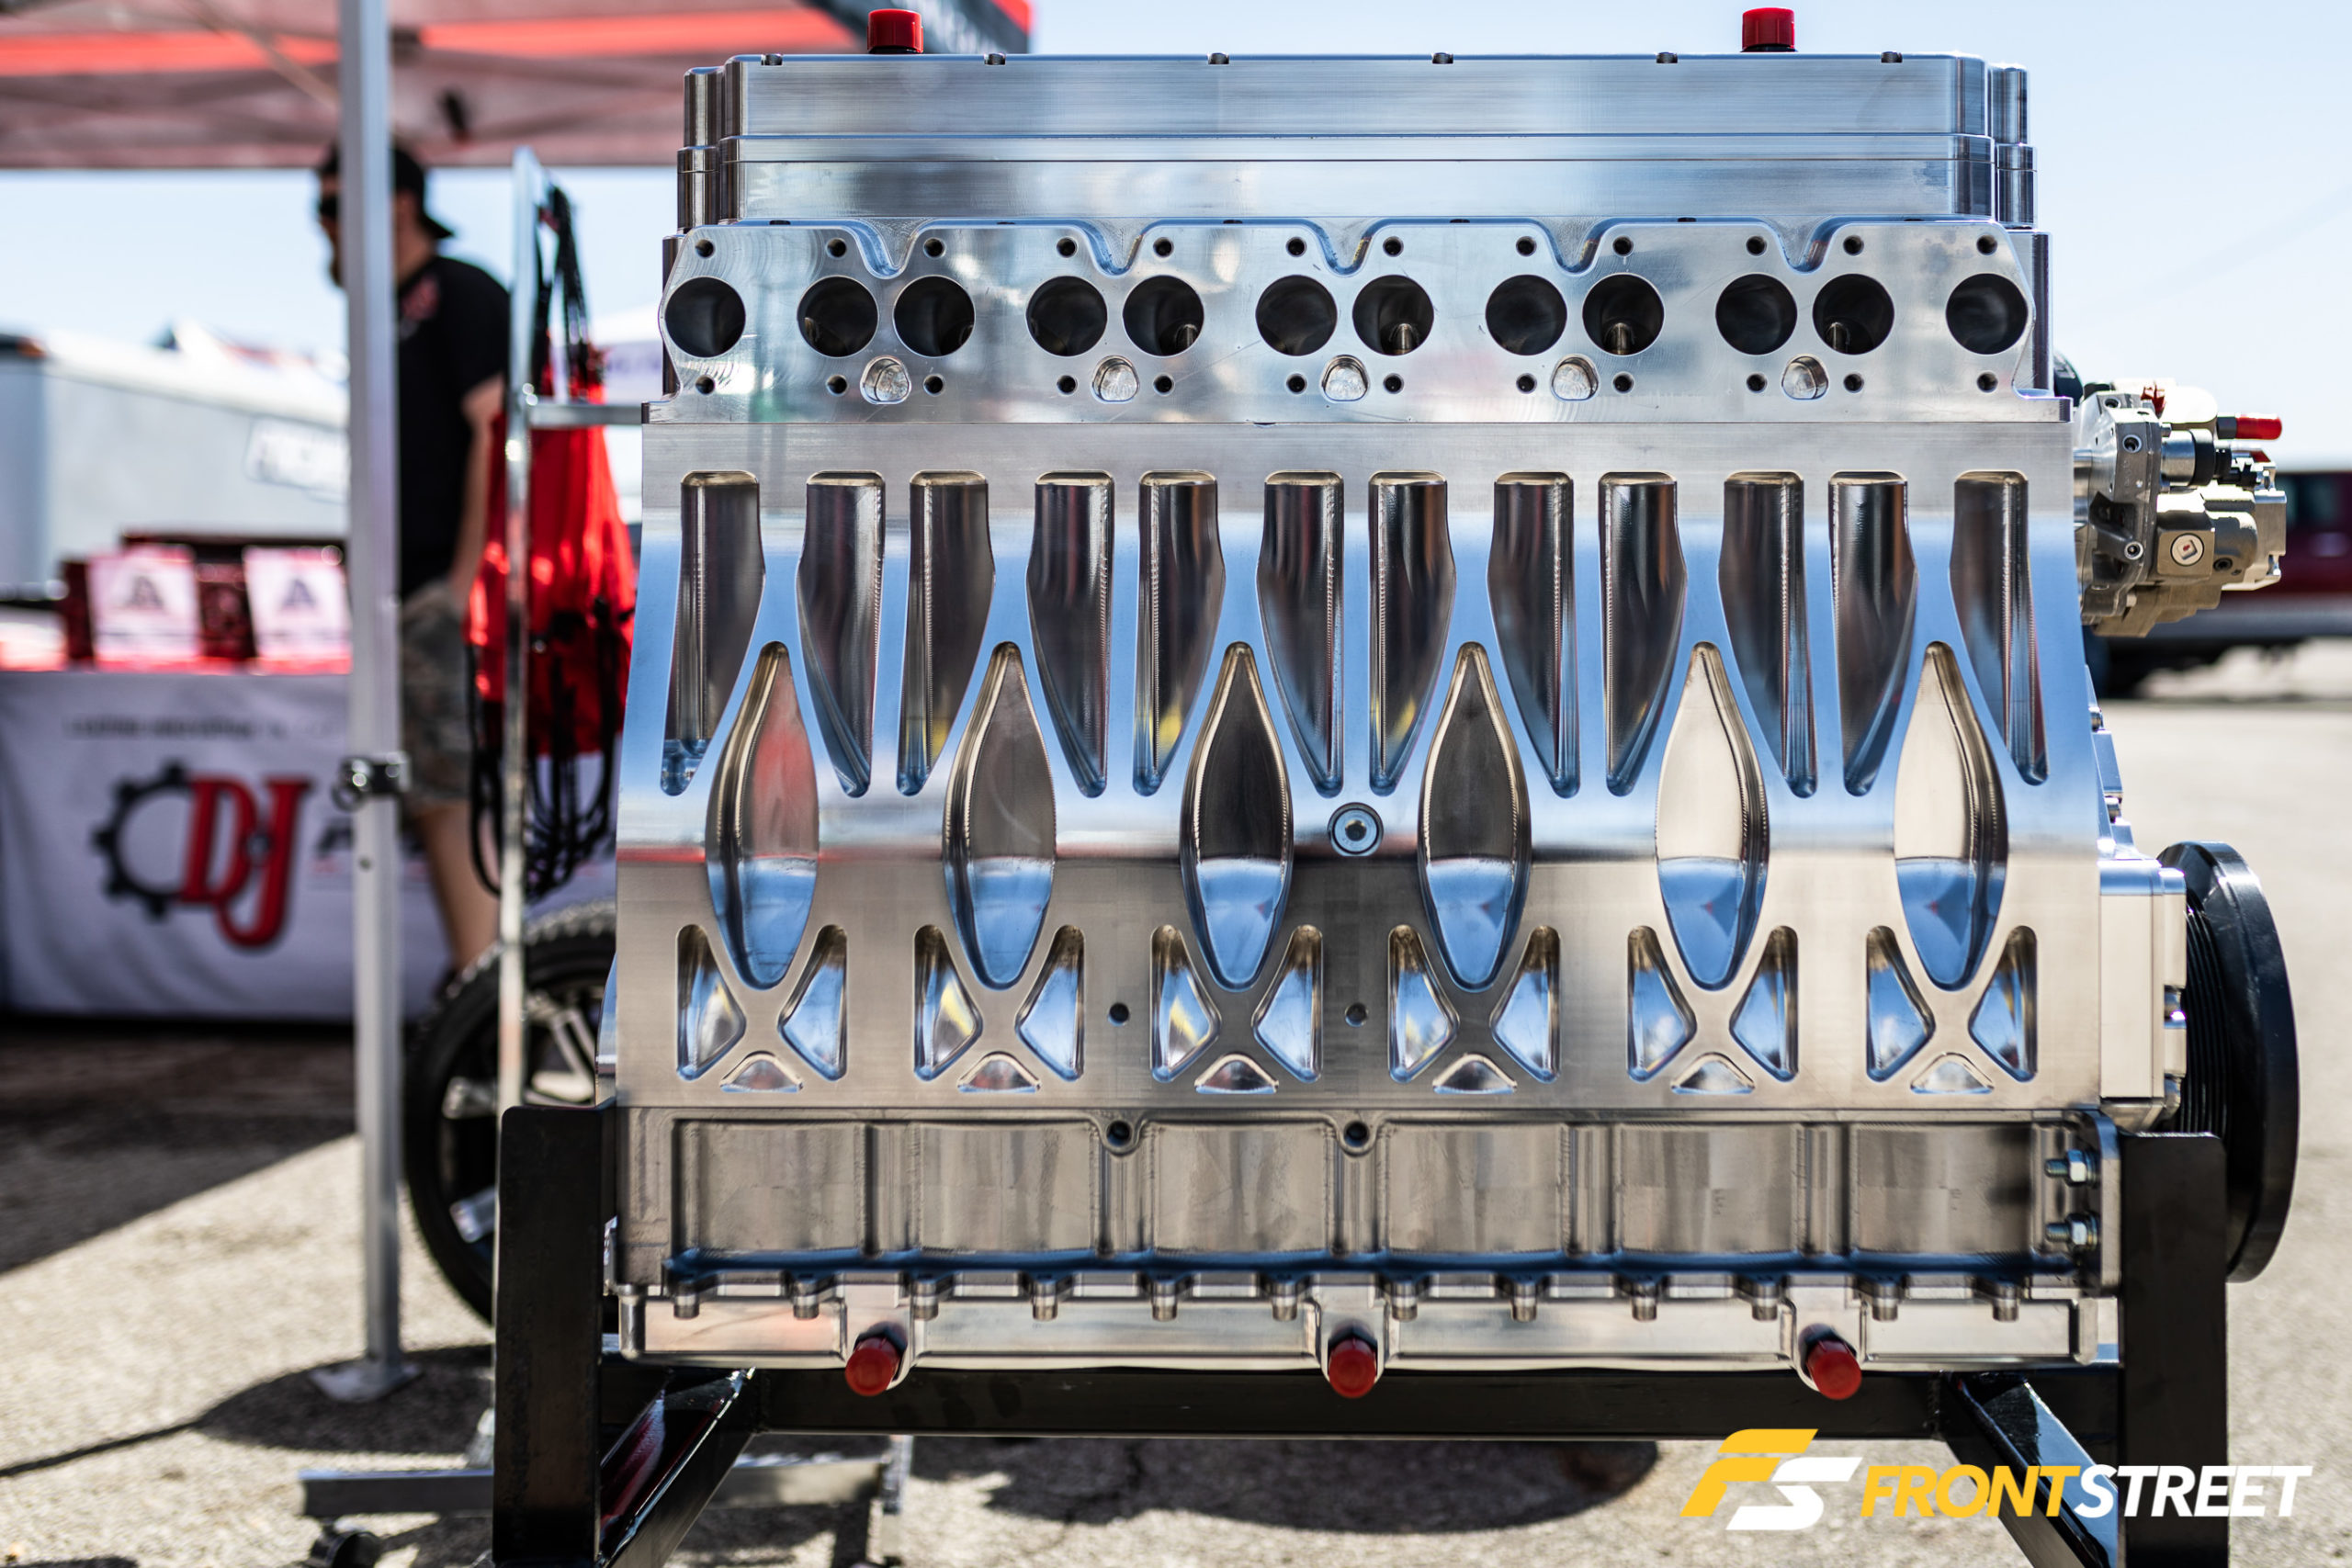 The Secrets Of The 3,200 Horsepower Executioner Diesel Engine